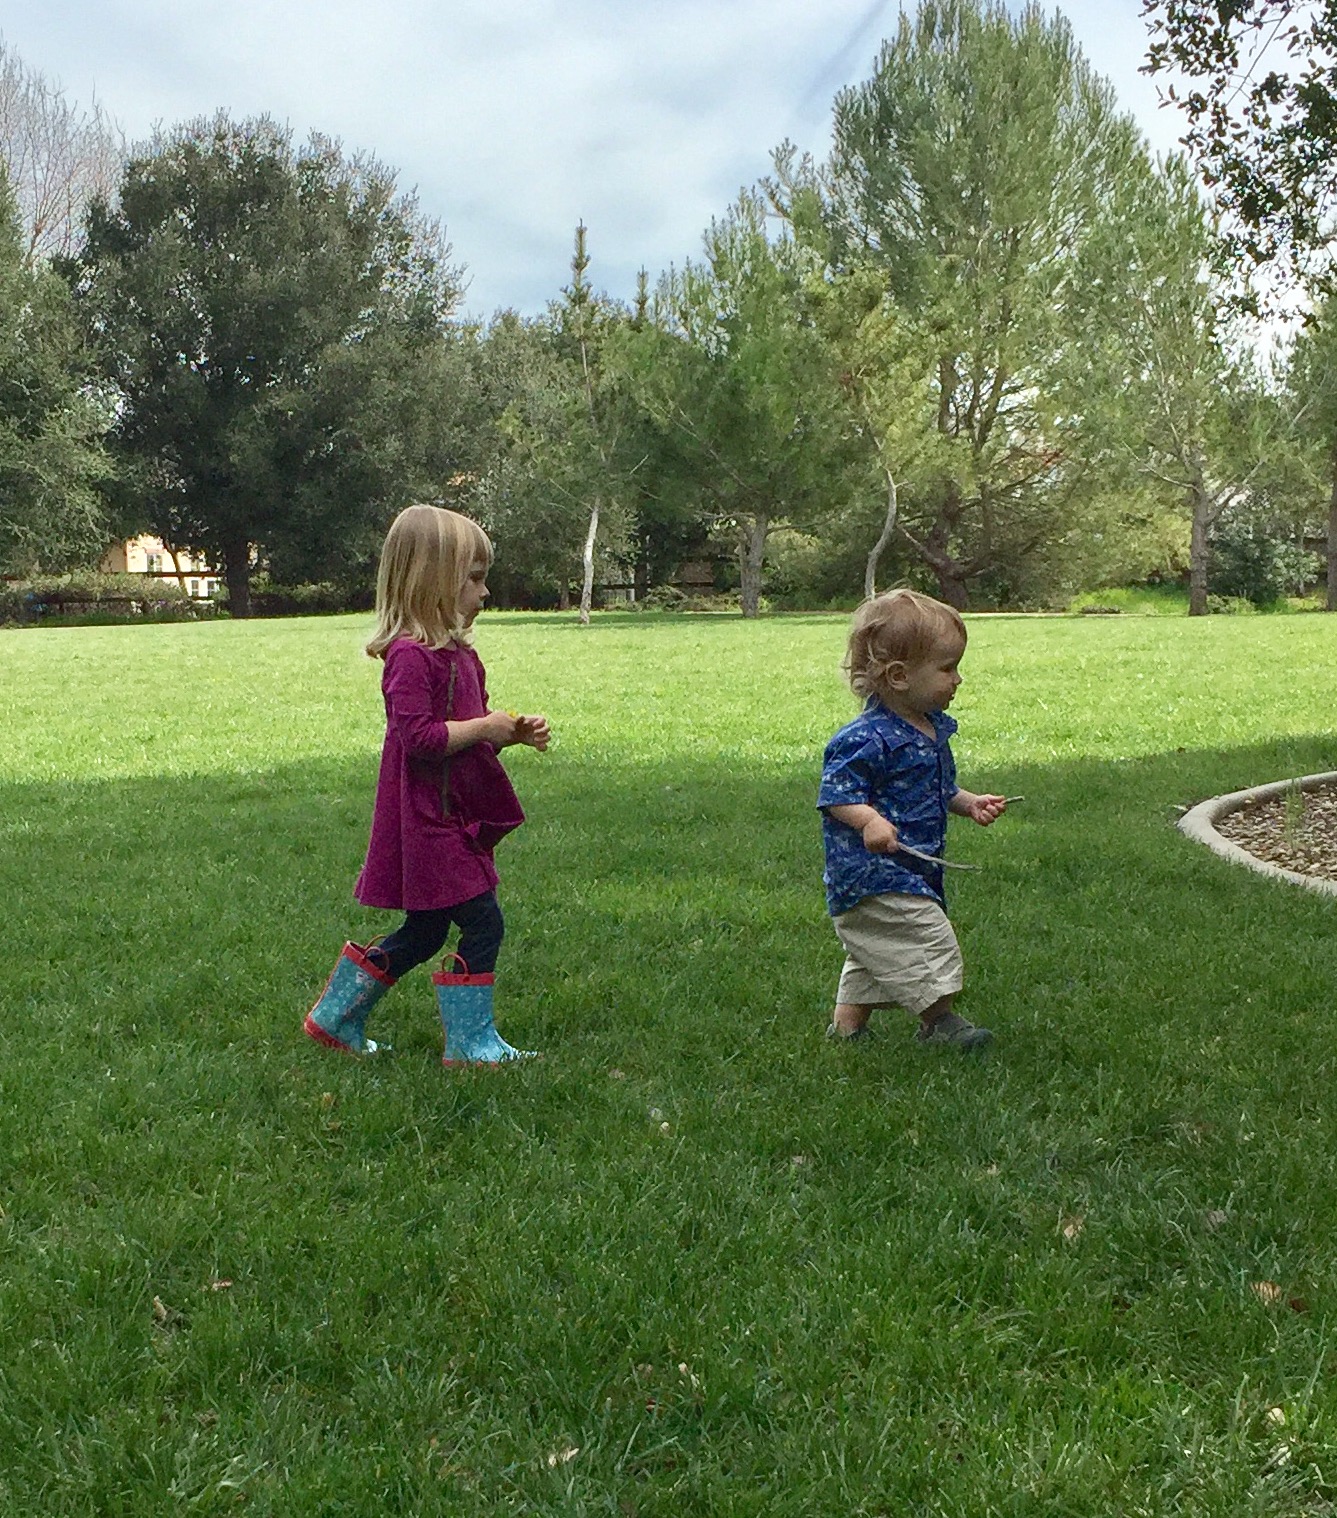 Here are the kids at Apple Valley Park in Atascadero. It's a little neighborhood park on the north end of town. It doesn't have a playground but it has a cute dirt loop trail and wide open grassy lawns, which we love.